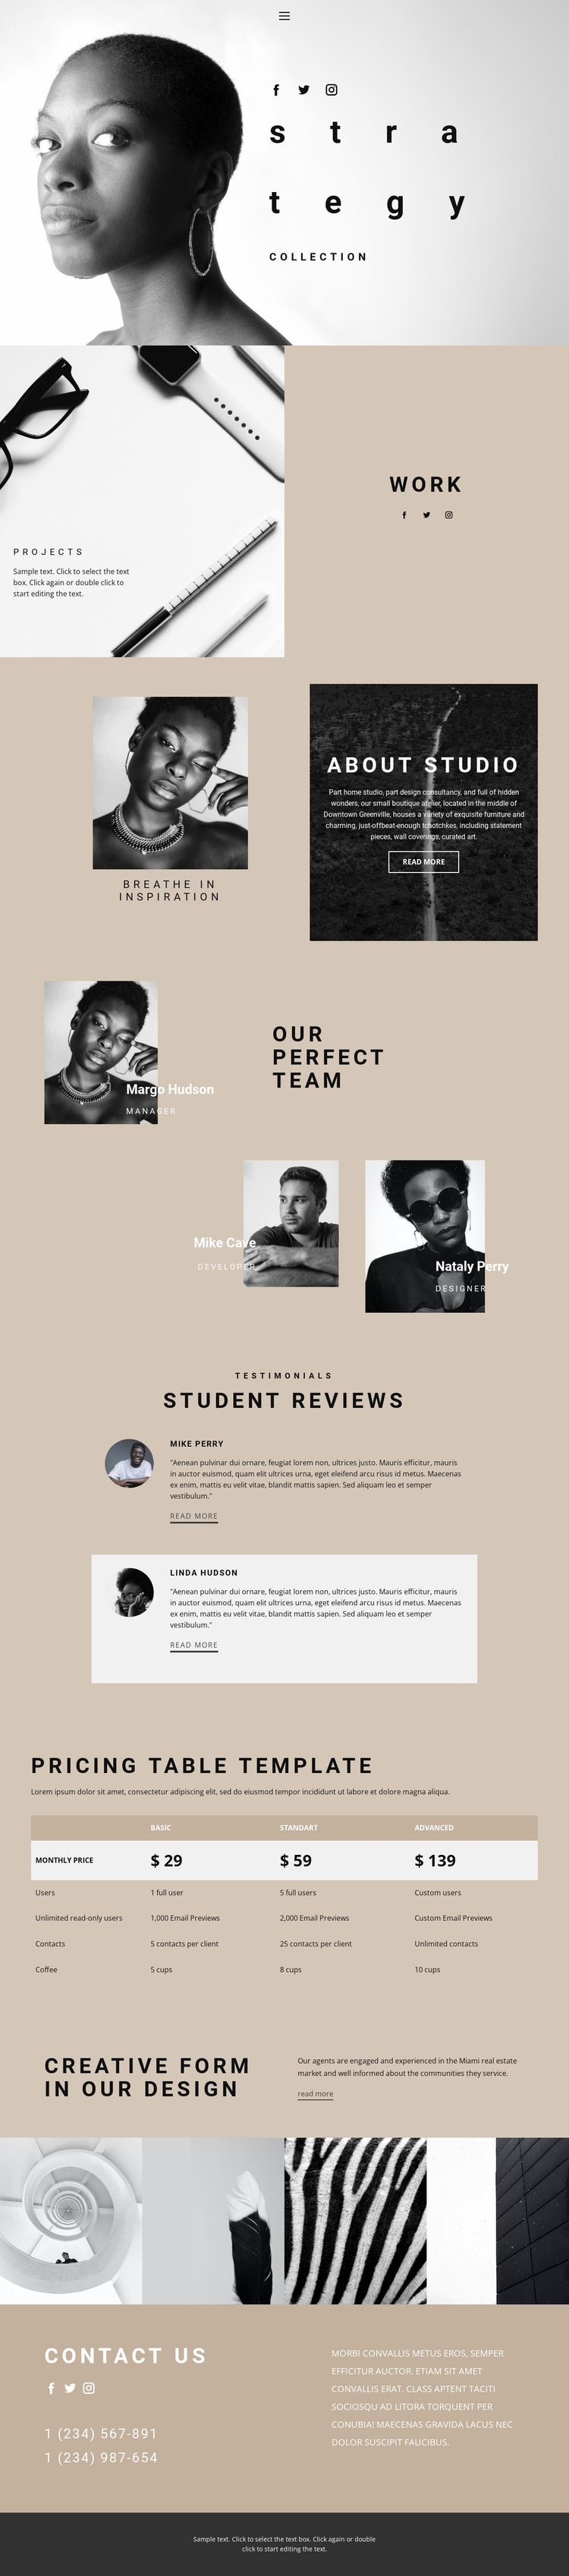 Strategy and grow Website Template